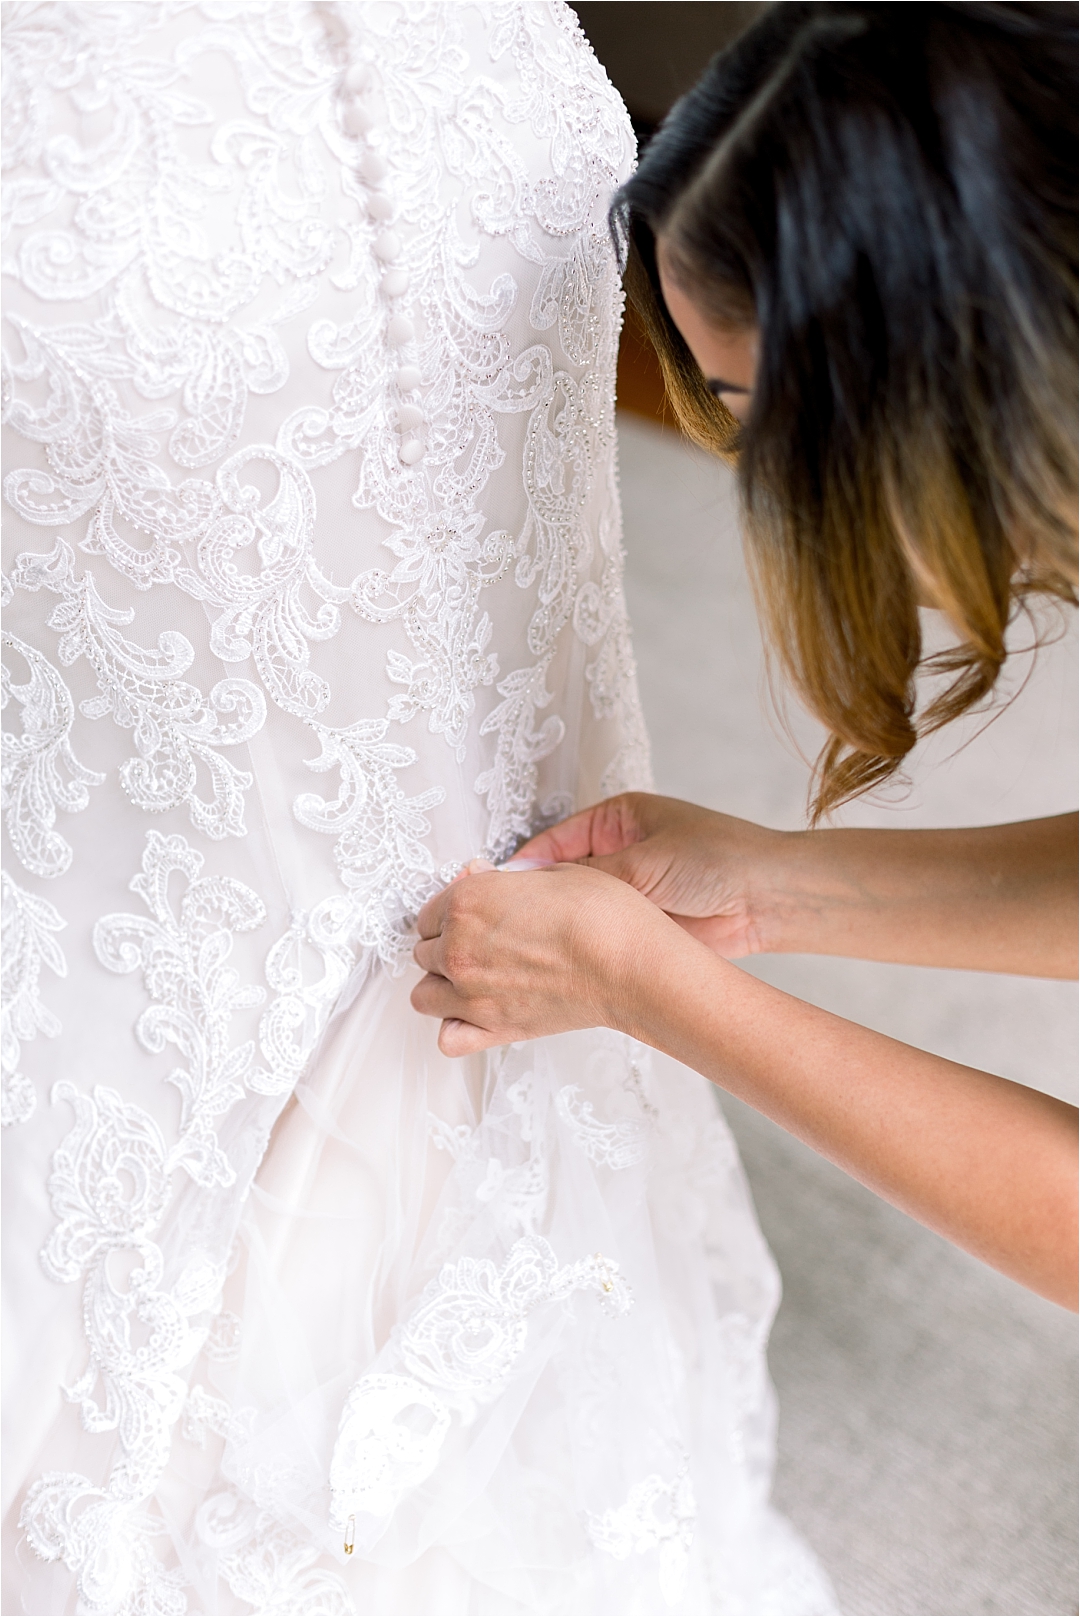 maid of honor helping bride with buttons on lace wedding dress_Photos by Leigh Wolfe, Atlanta's Top Wedding Photographer